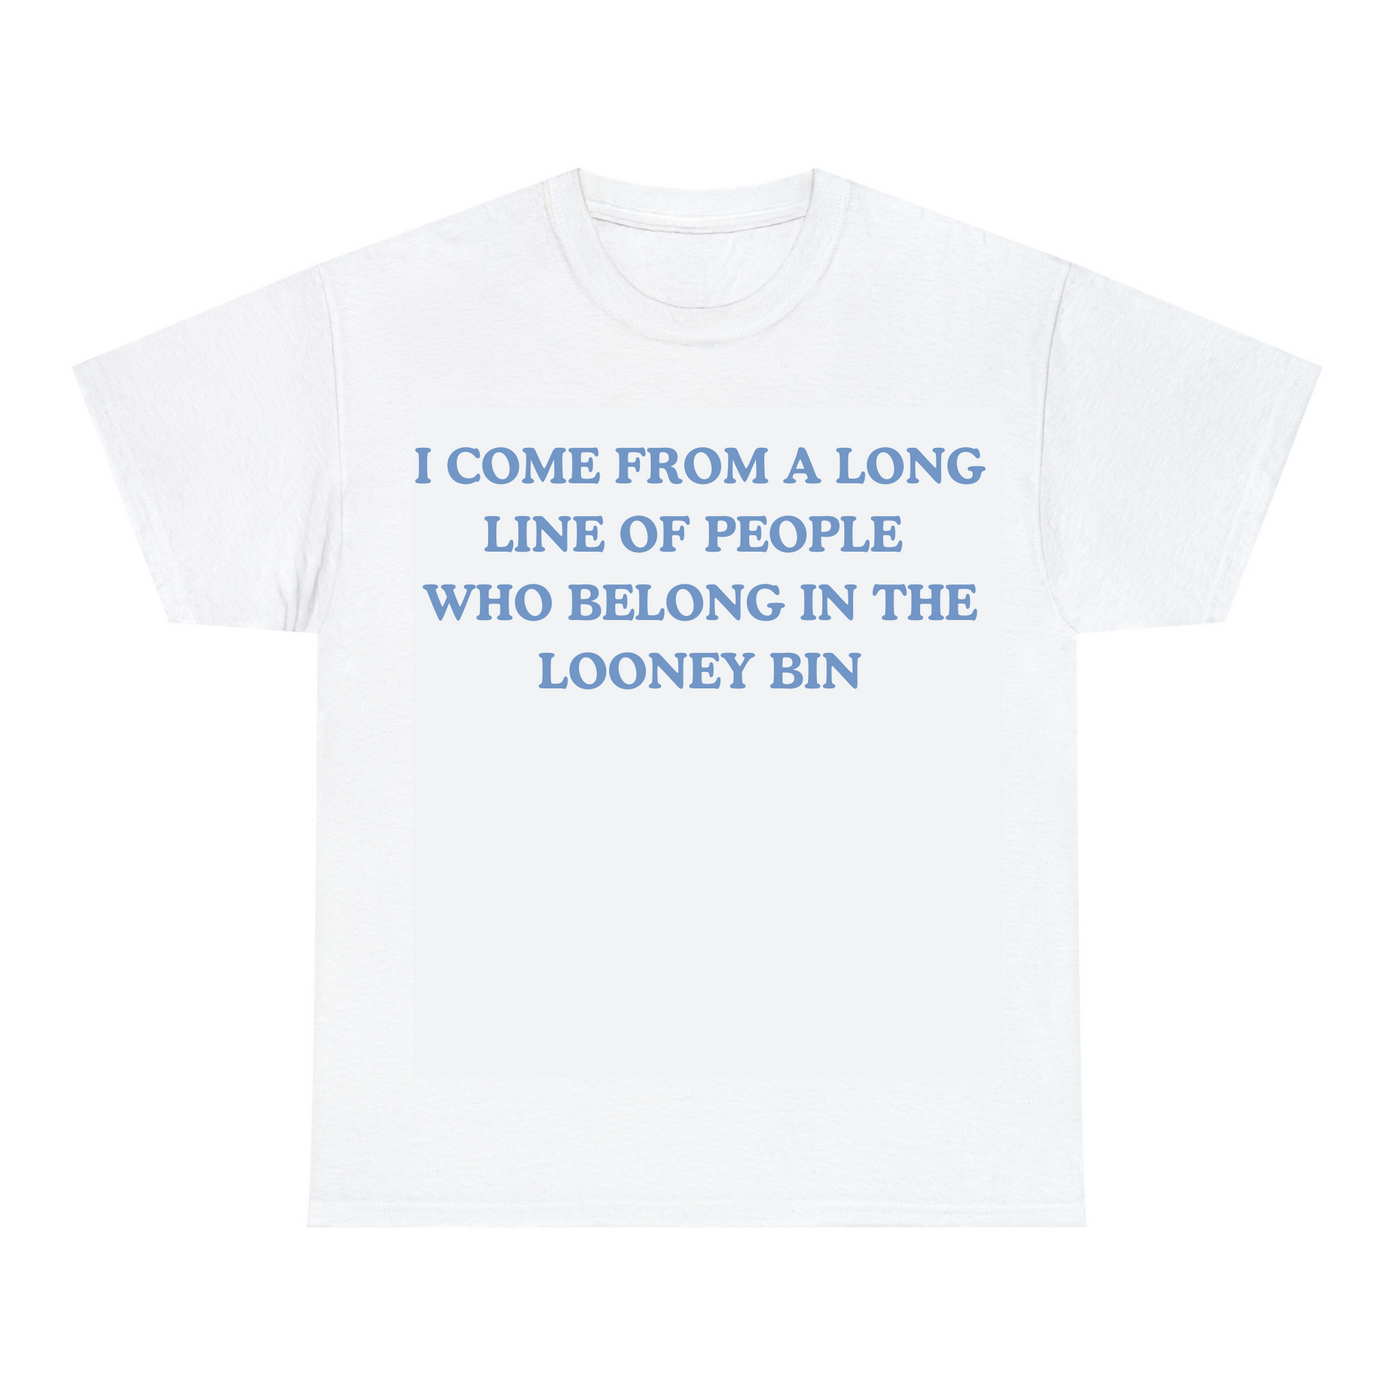 I Come From A Long Line Of People Who Belong In The Looney Bin